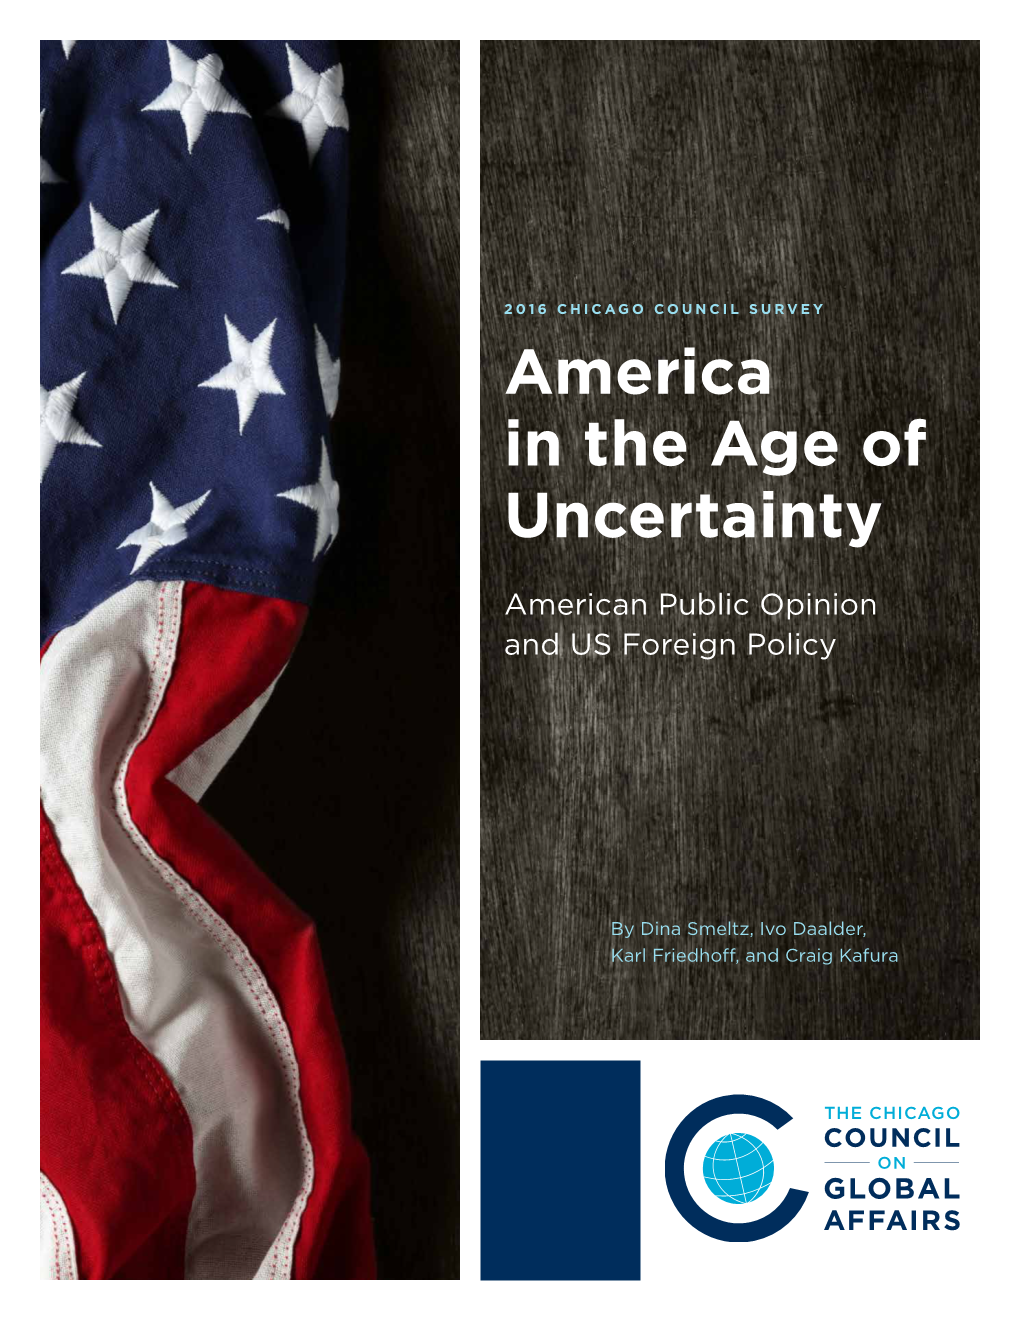 America in the Age of Uncertainty